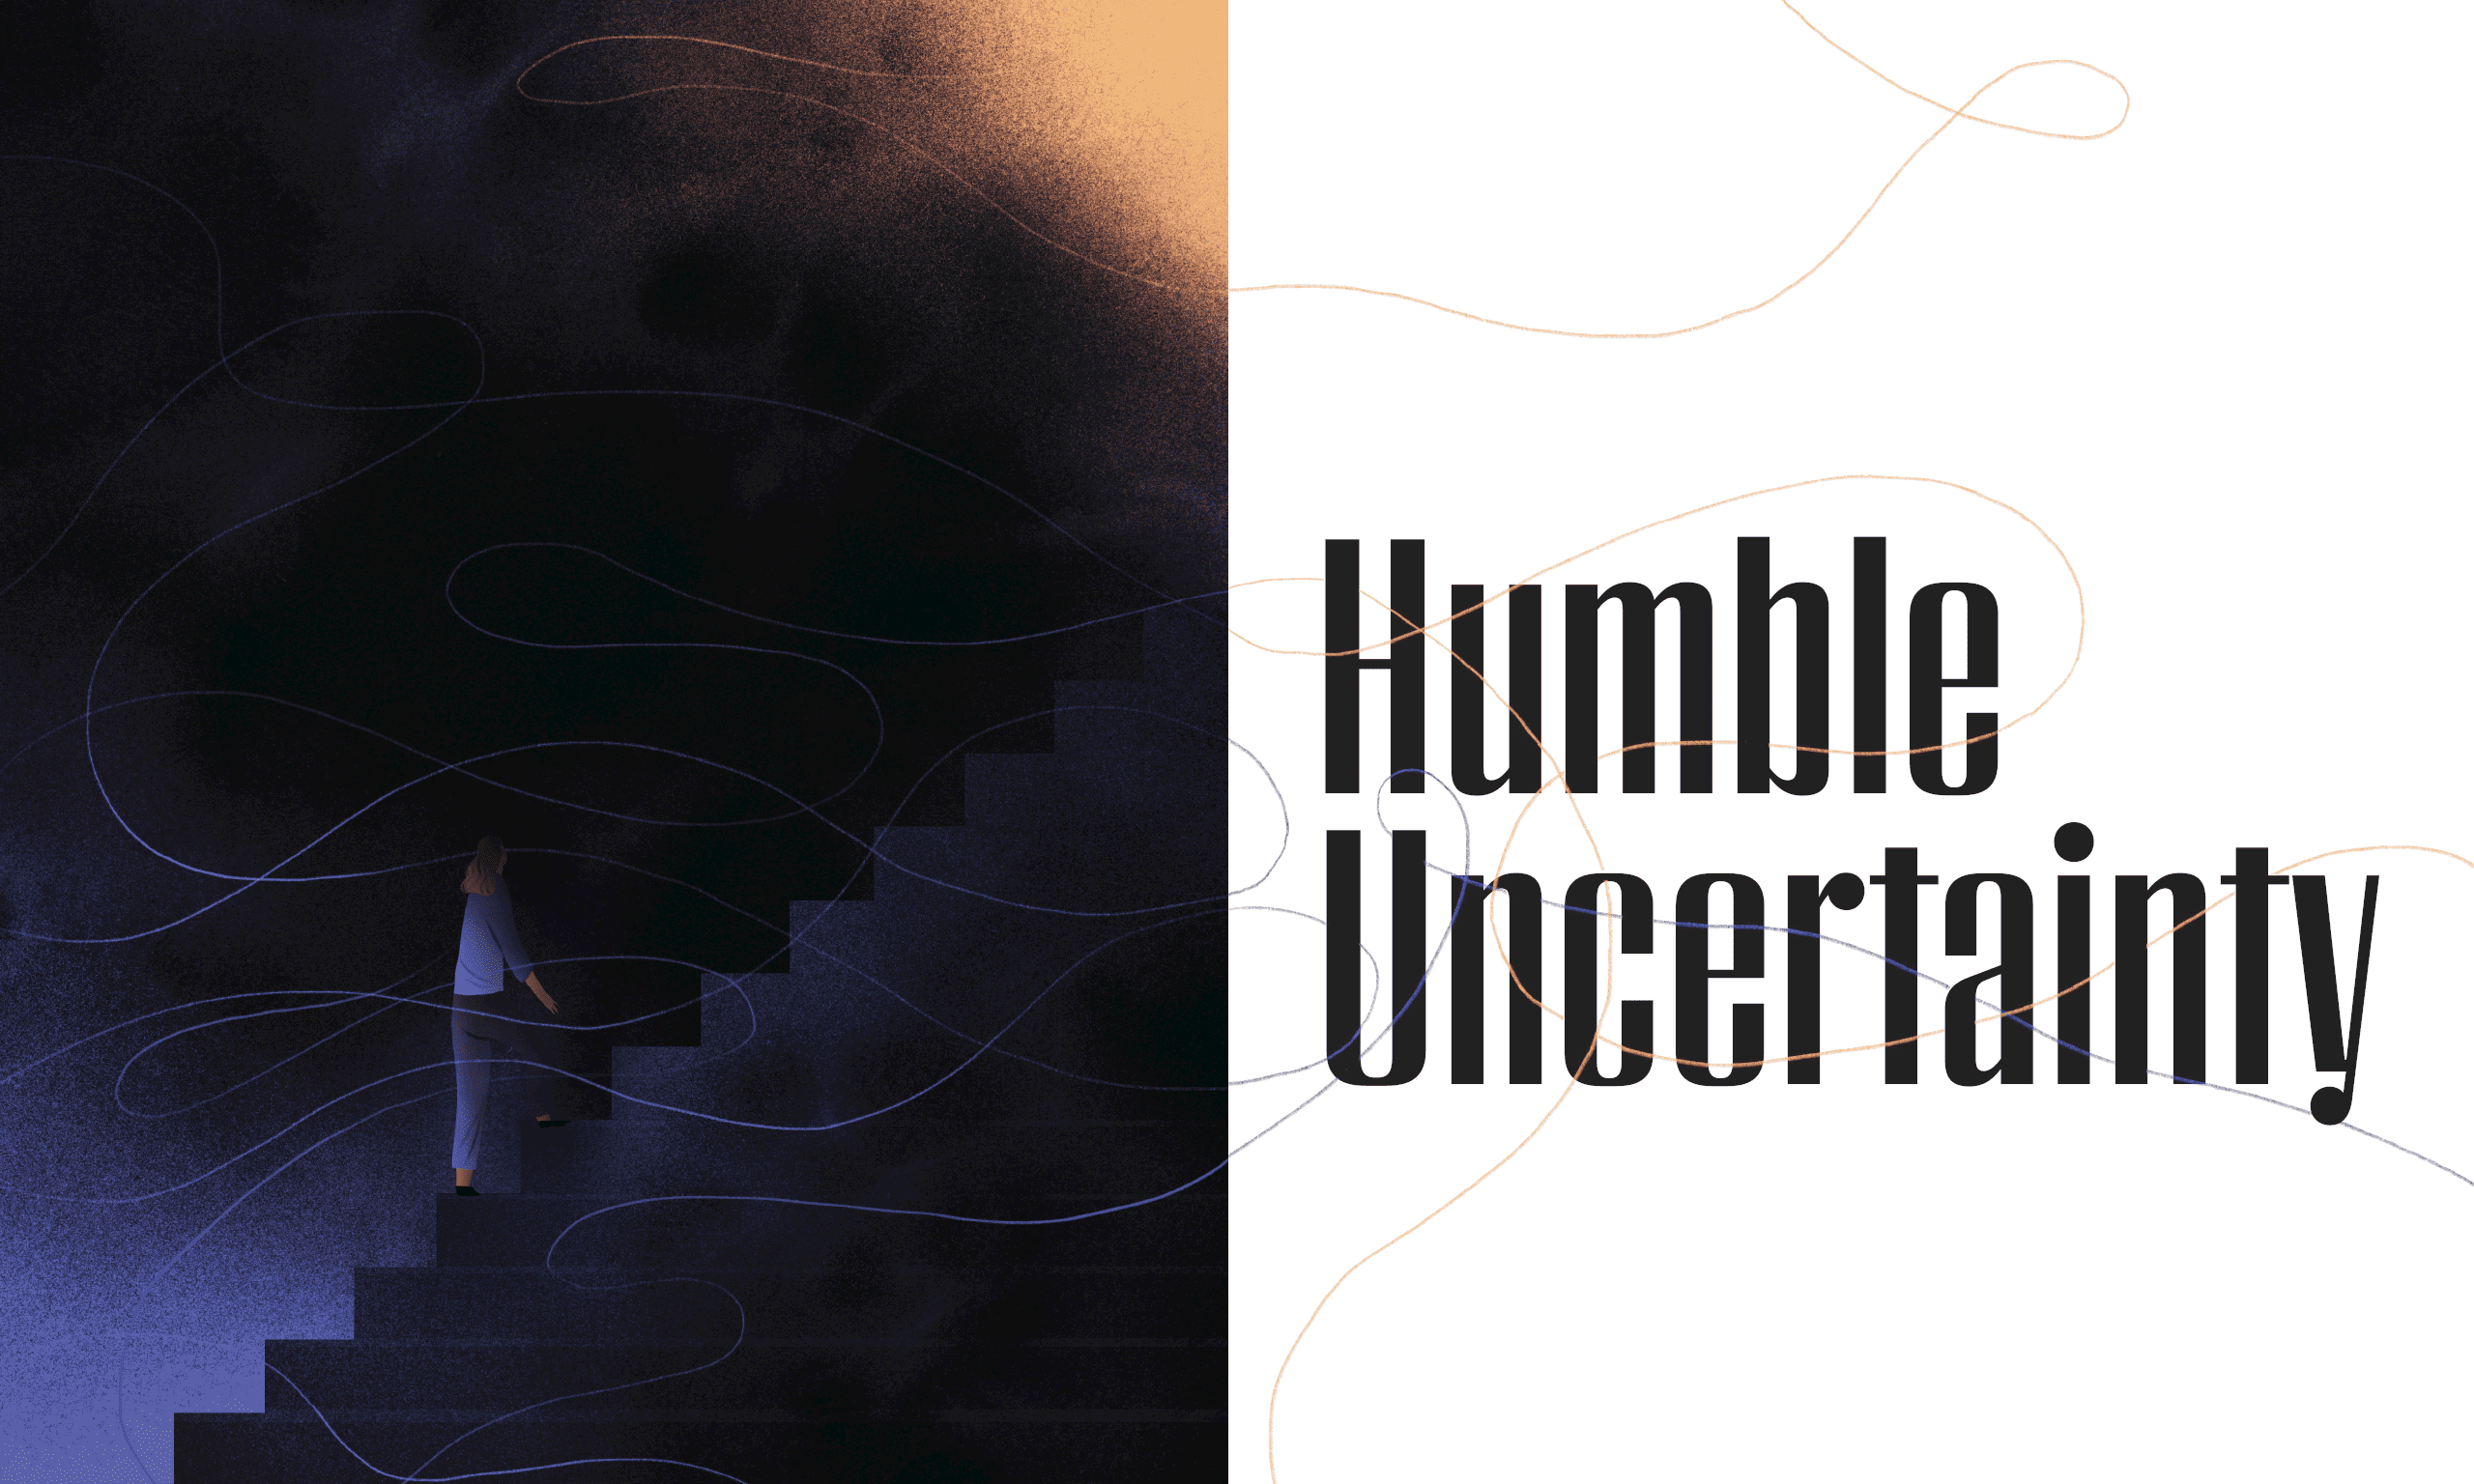 The opening spread of a magazine article titled "Humble Uncertainty," which features and illustration of a person walking up stairs in the dark toward light.